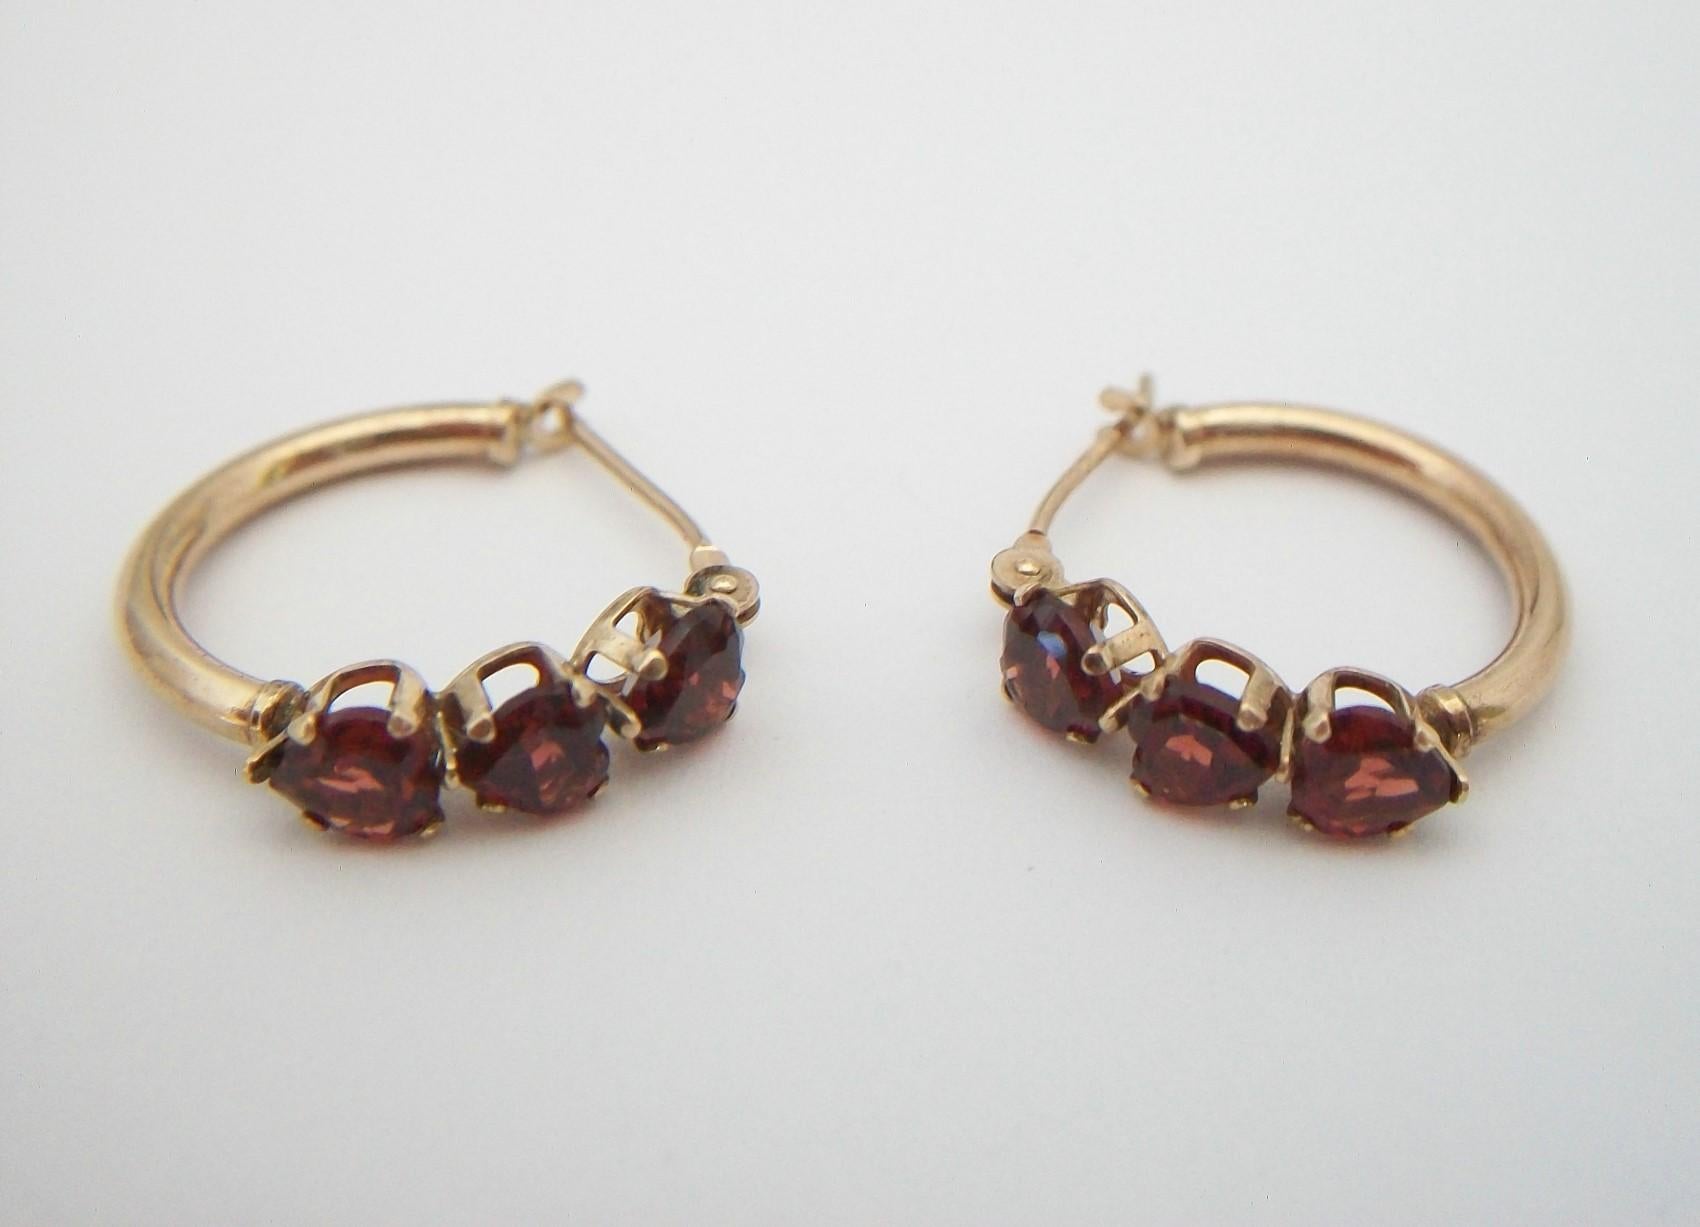 Vintage Heart Shaped CZ Garnet & 10K Gold Hoop Earrings - U.S. - Circa 1980's In Good Condition For Sale In Chatham, CA